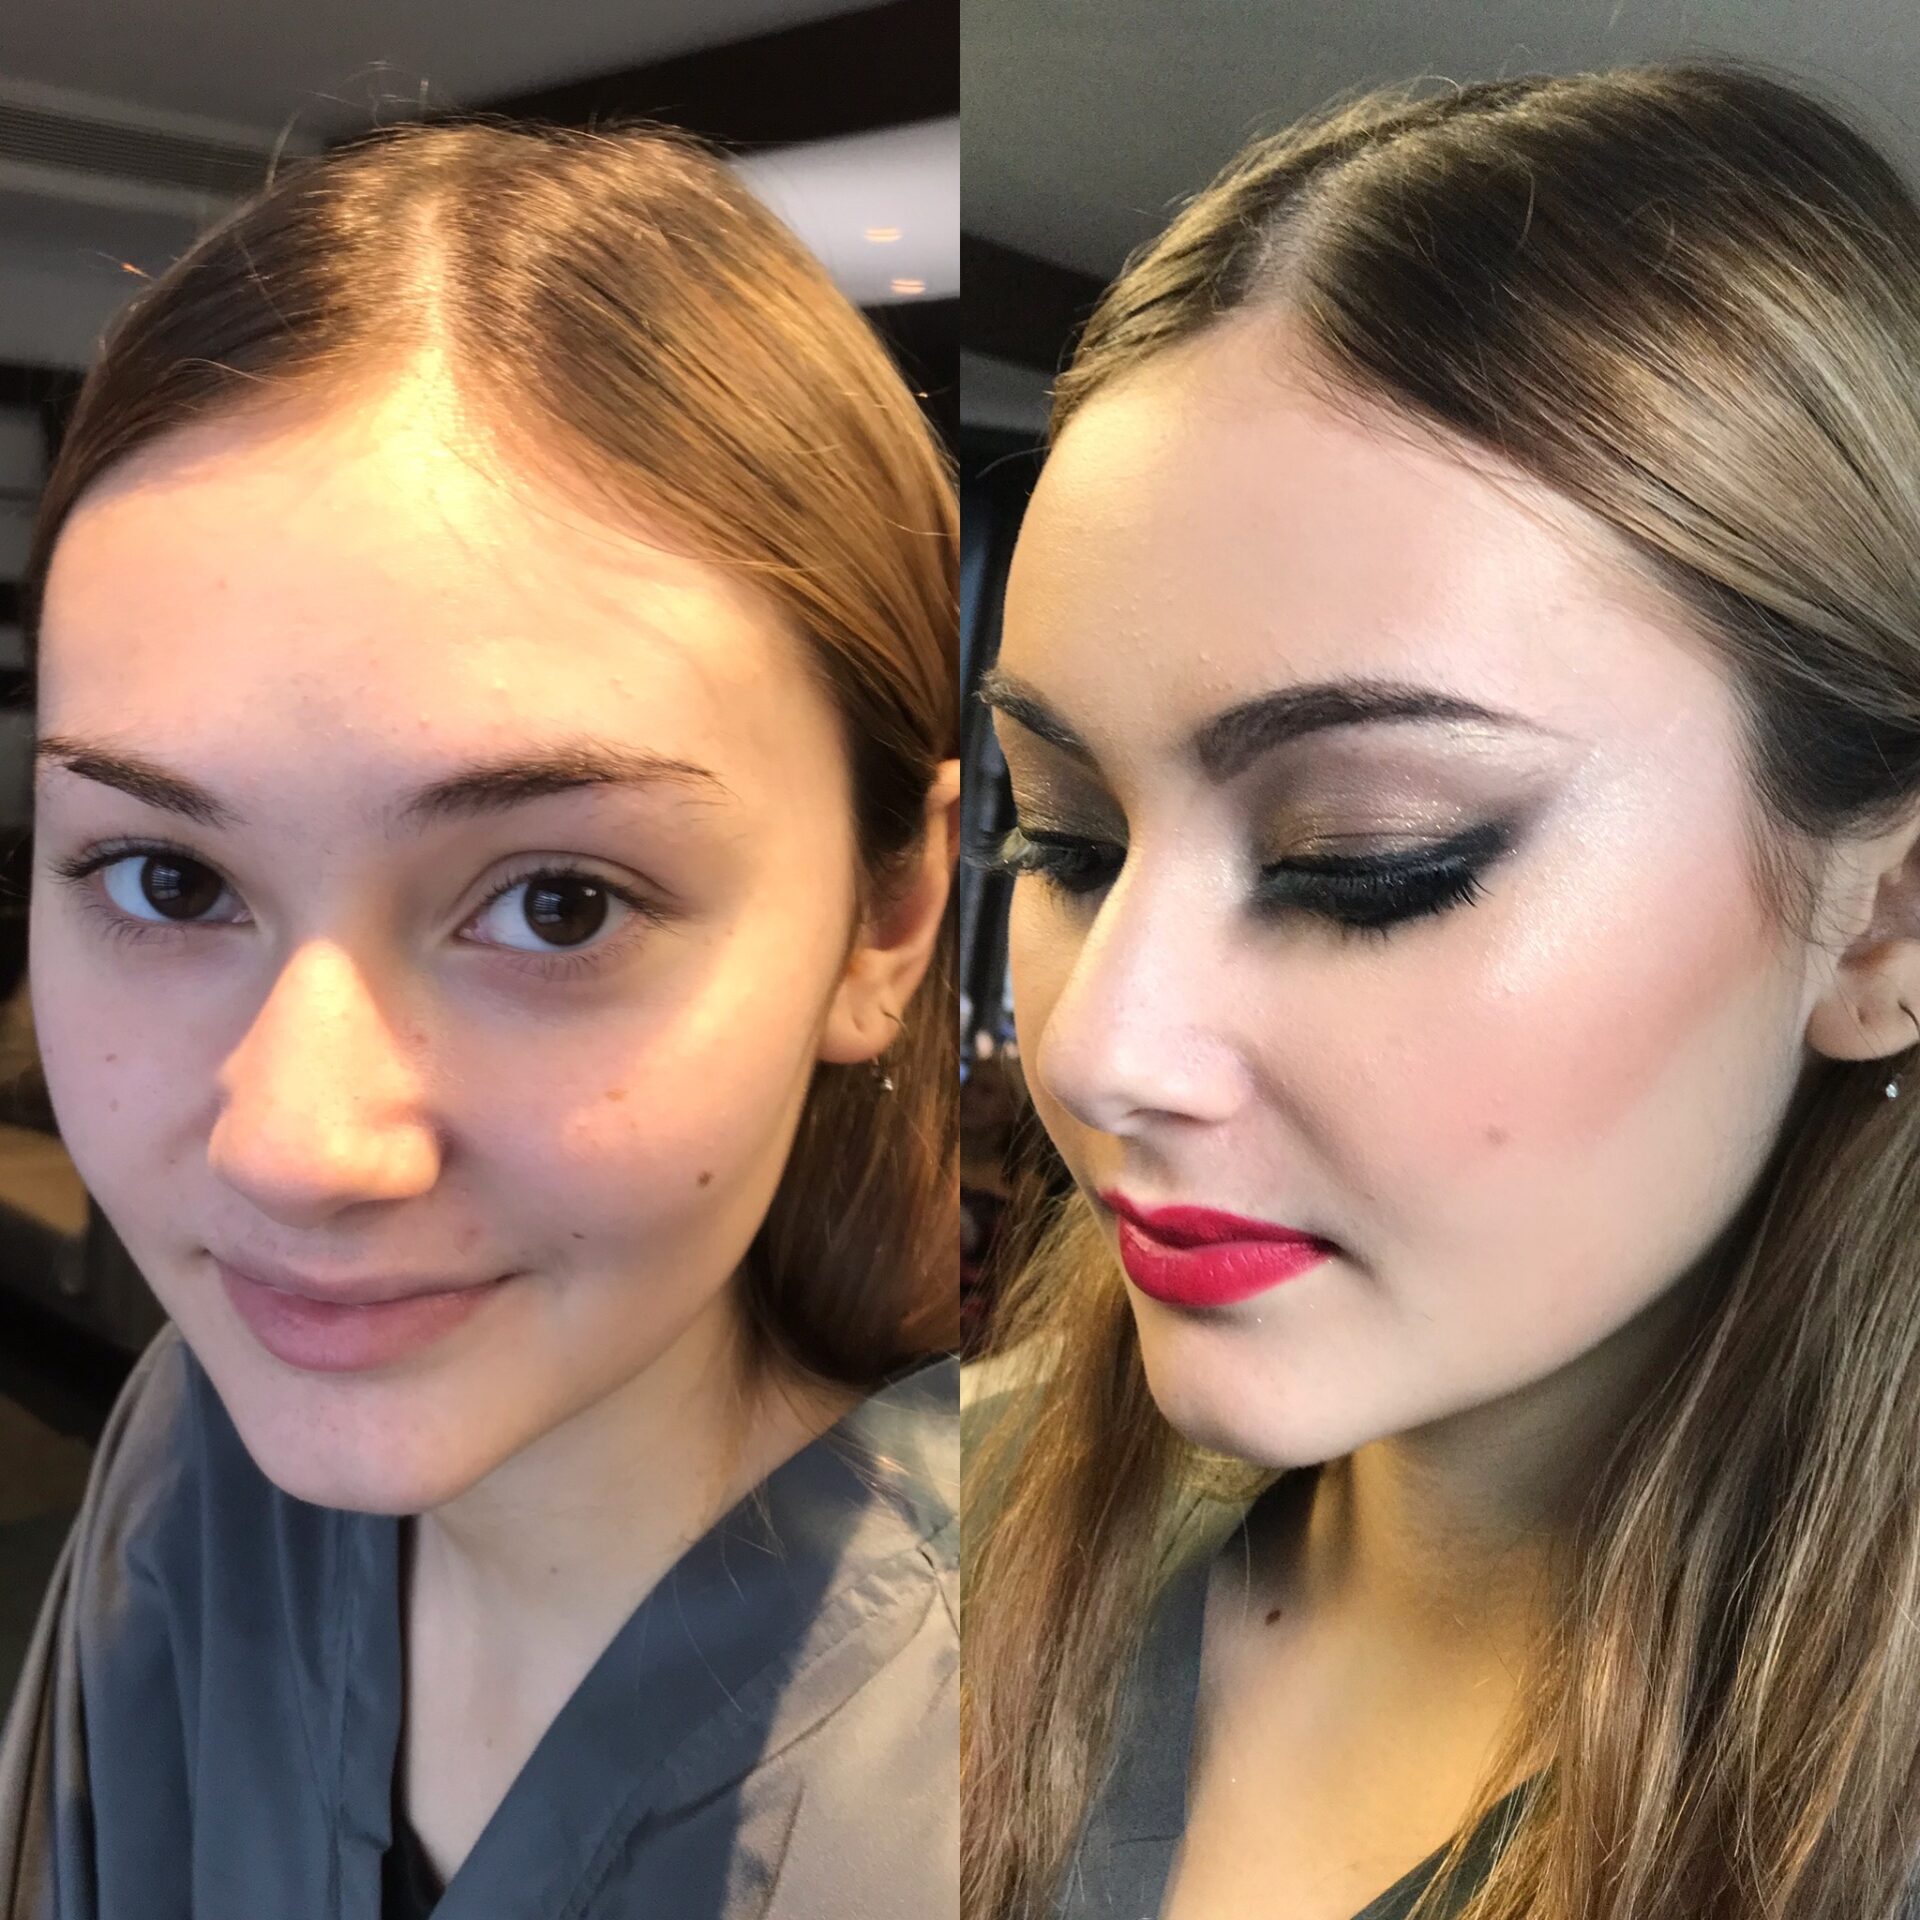 A collage of a person’s before and after makeup look